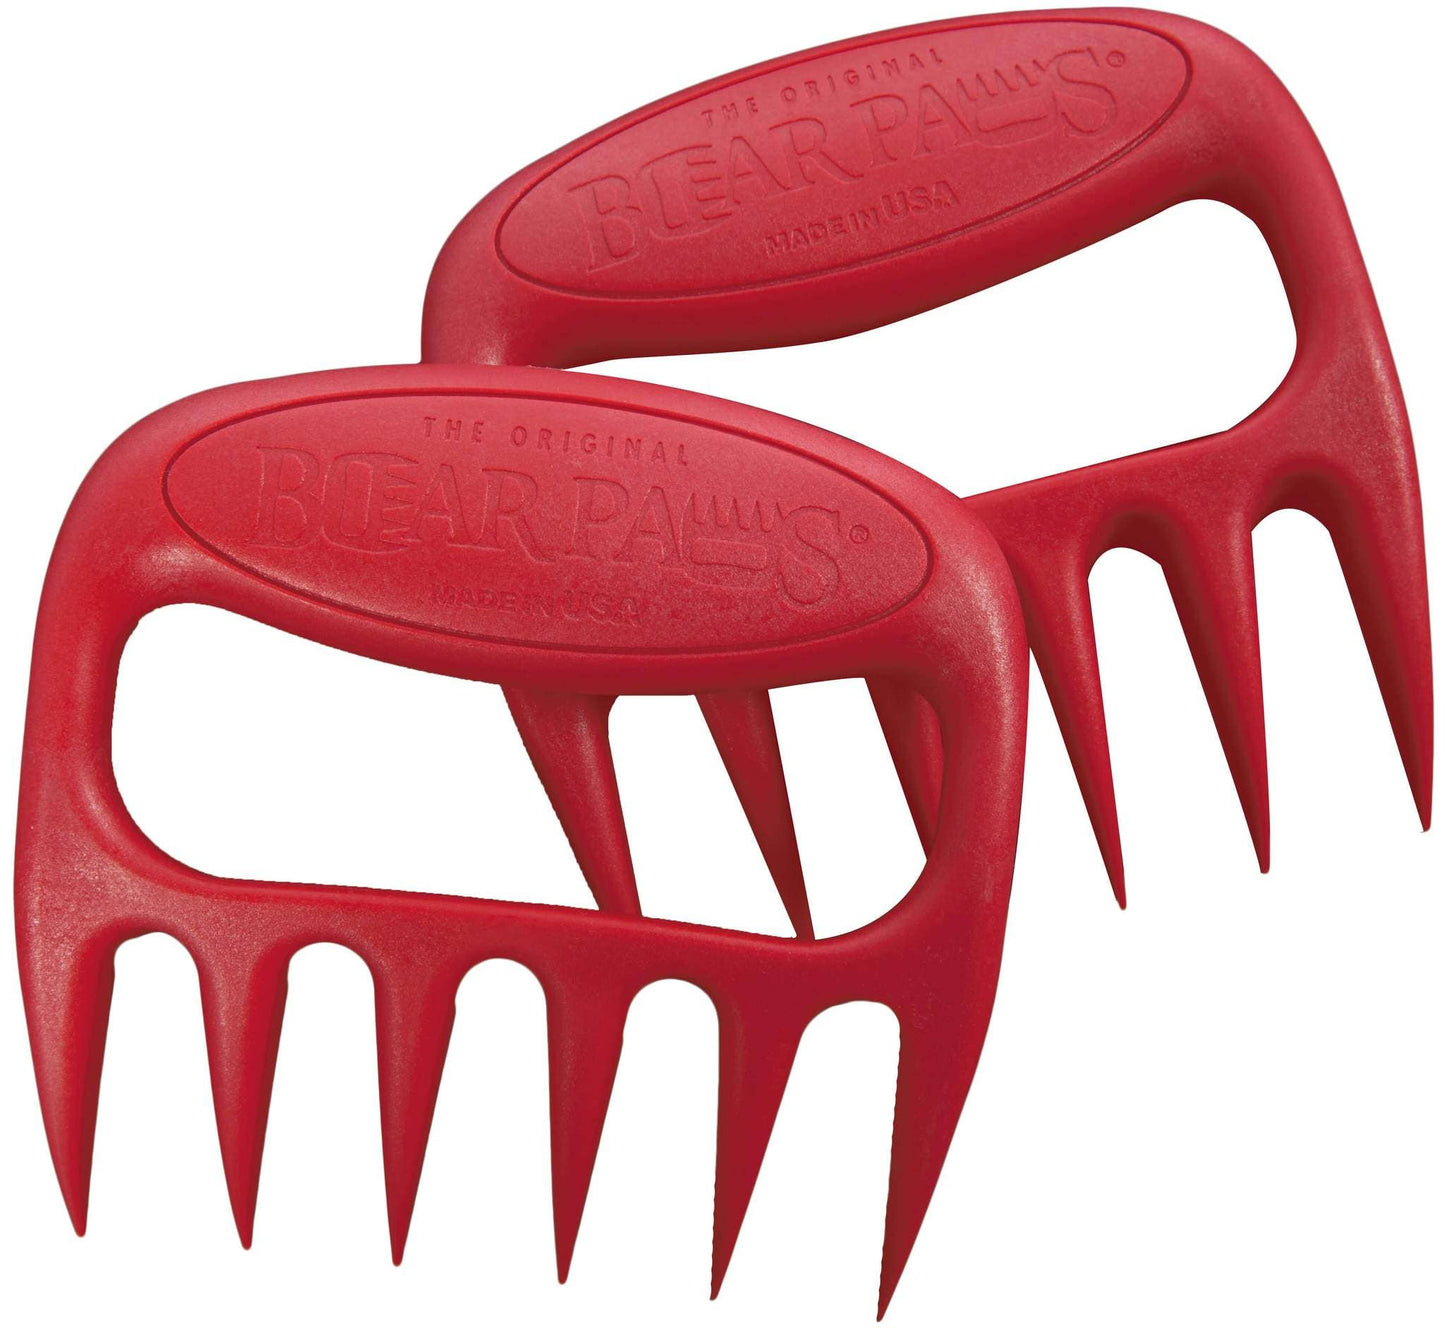 Bear Paw Products - Red Original Meat Shredder